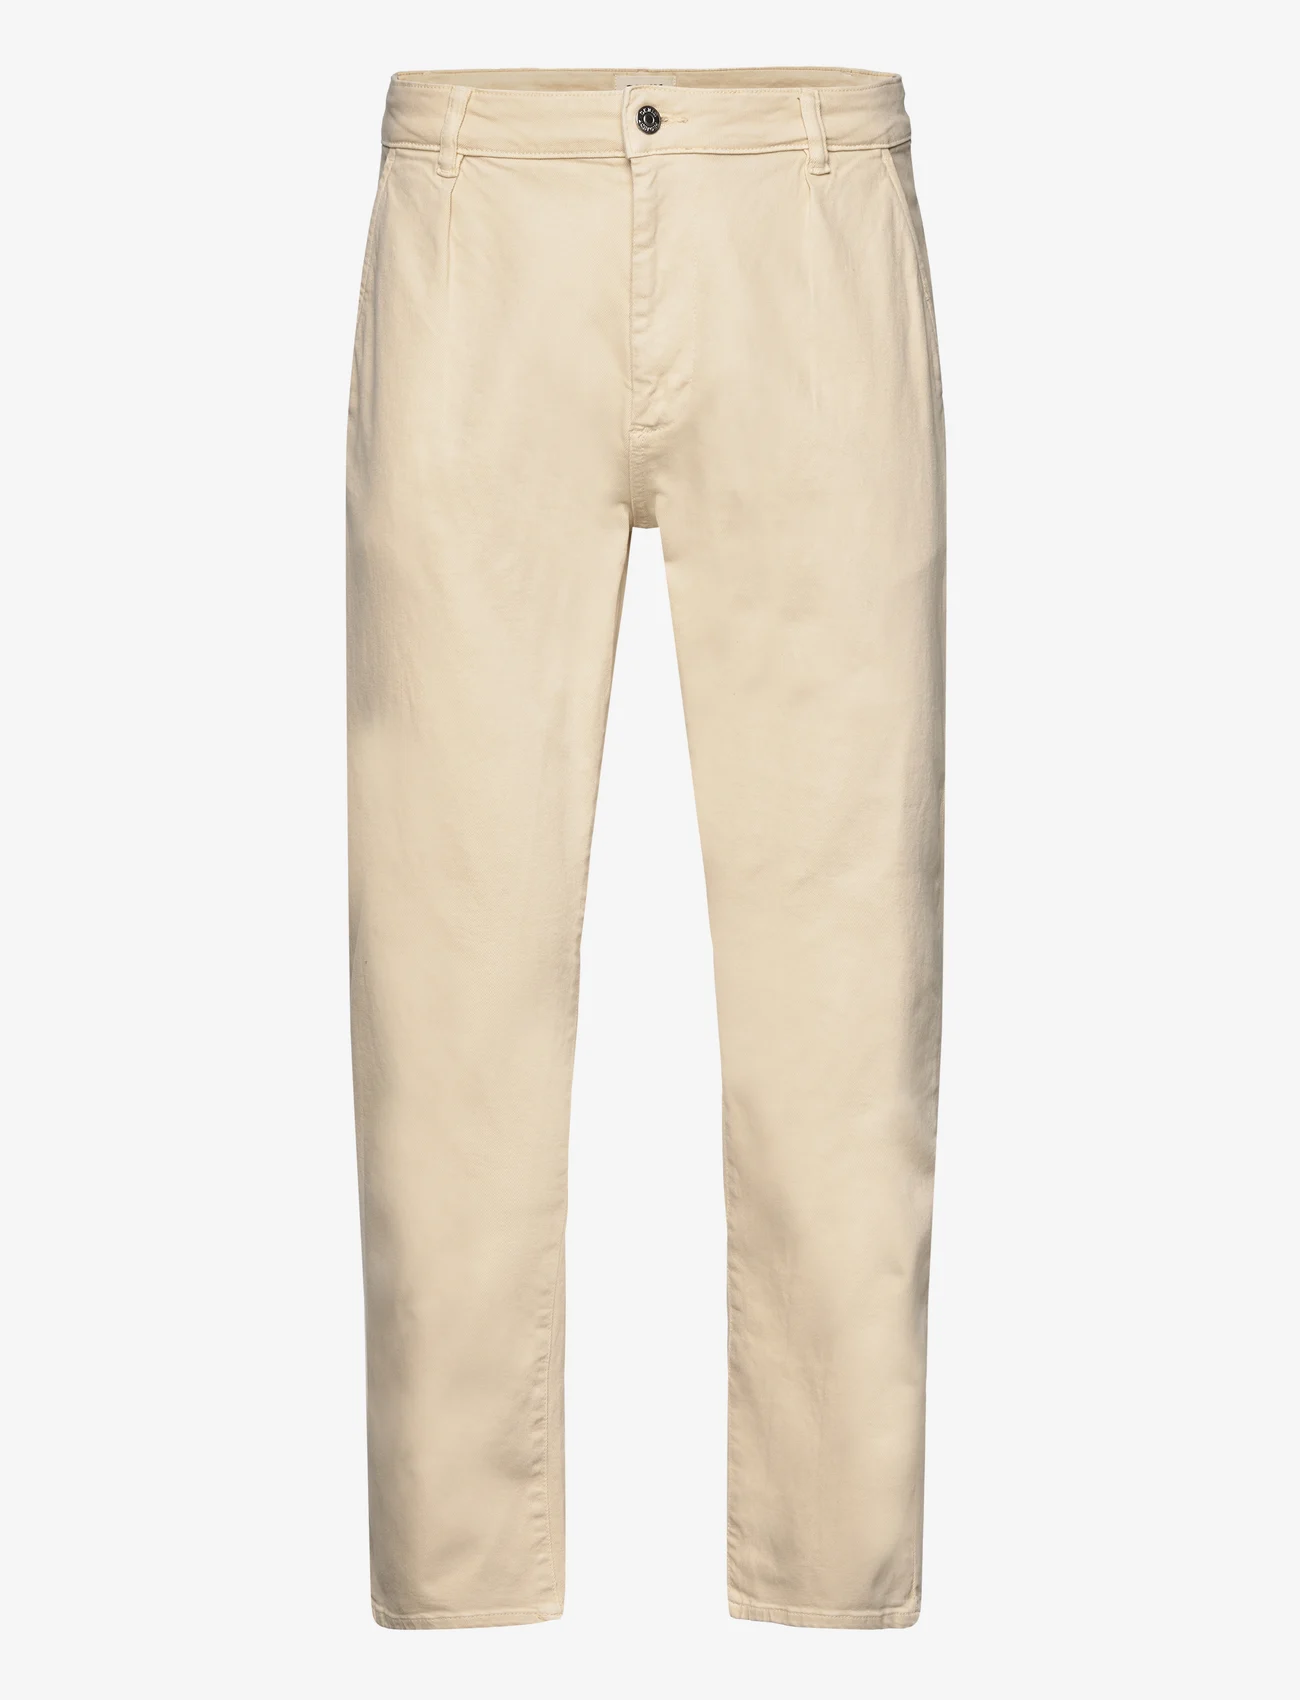 Denim project - DPChino Recycled Pants - chino's - bleached sand - 0